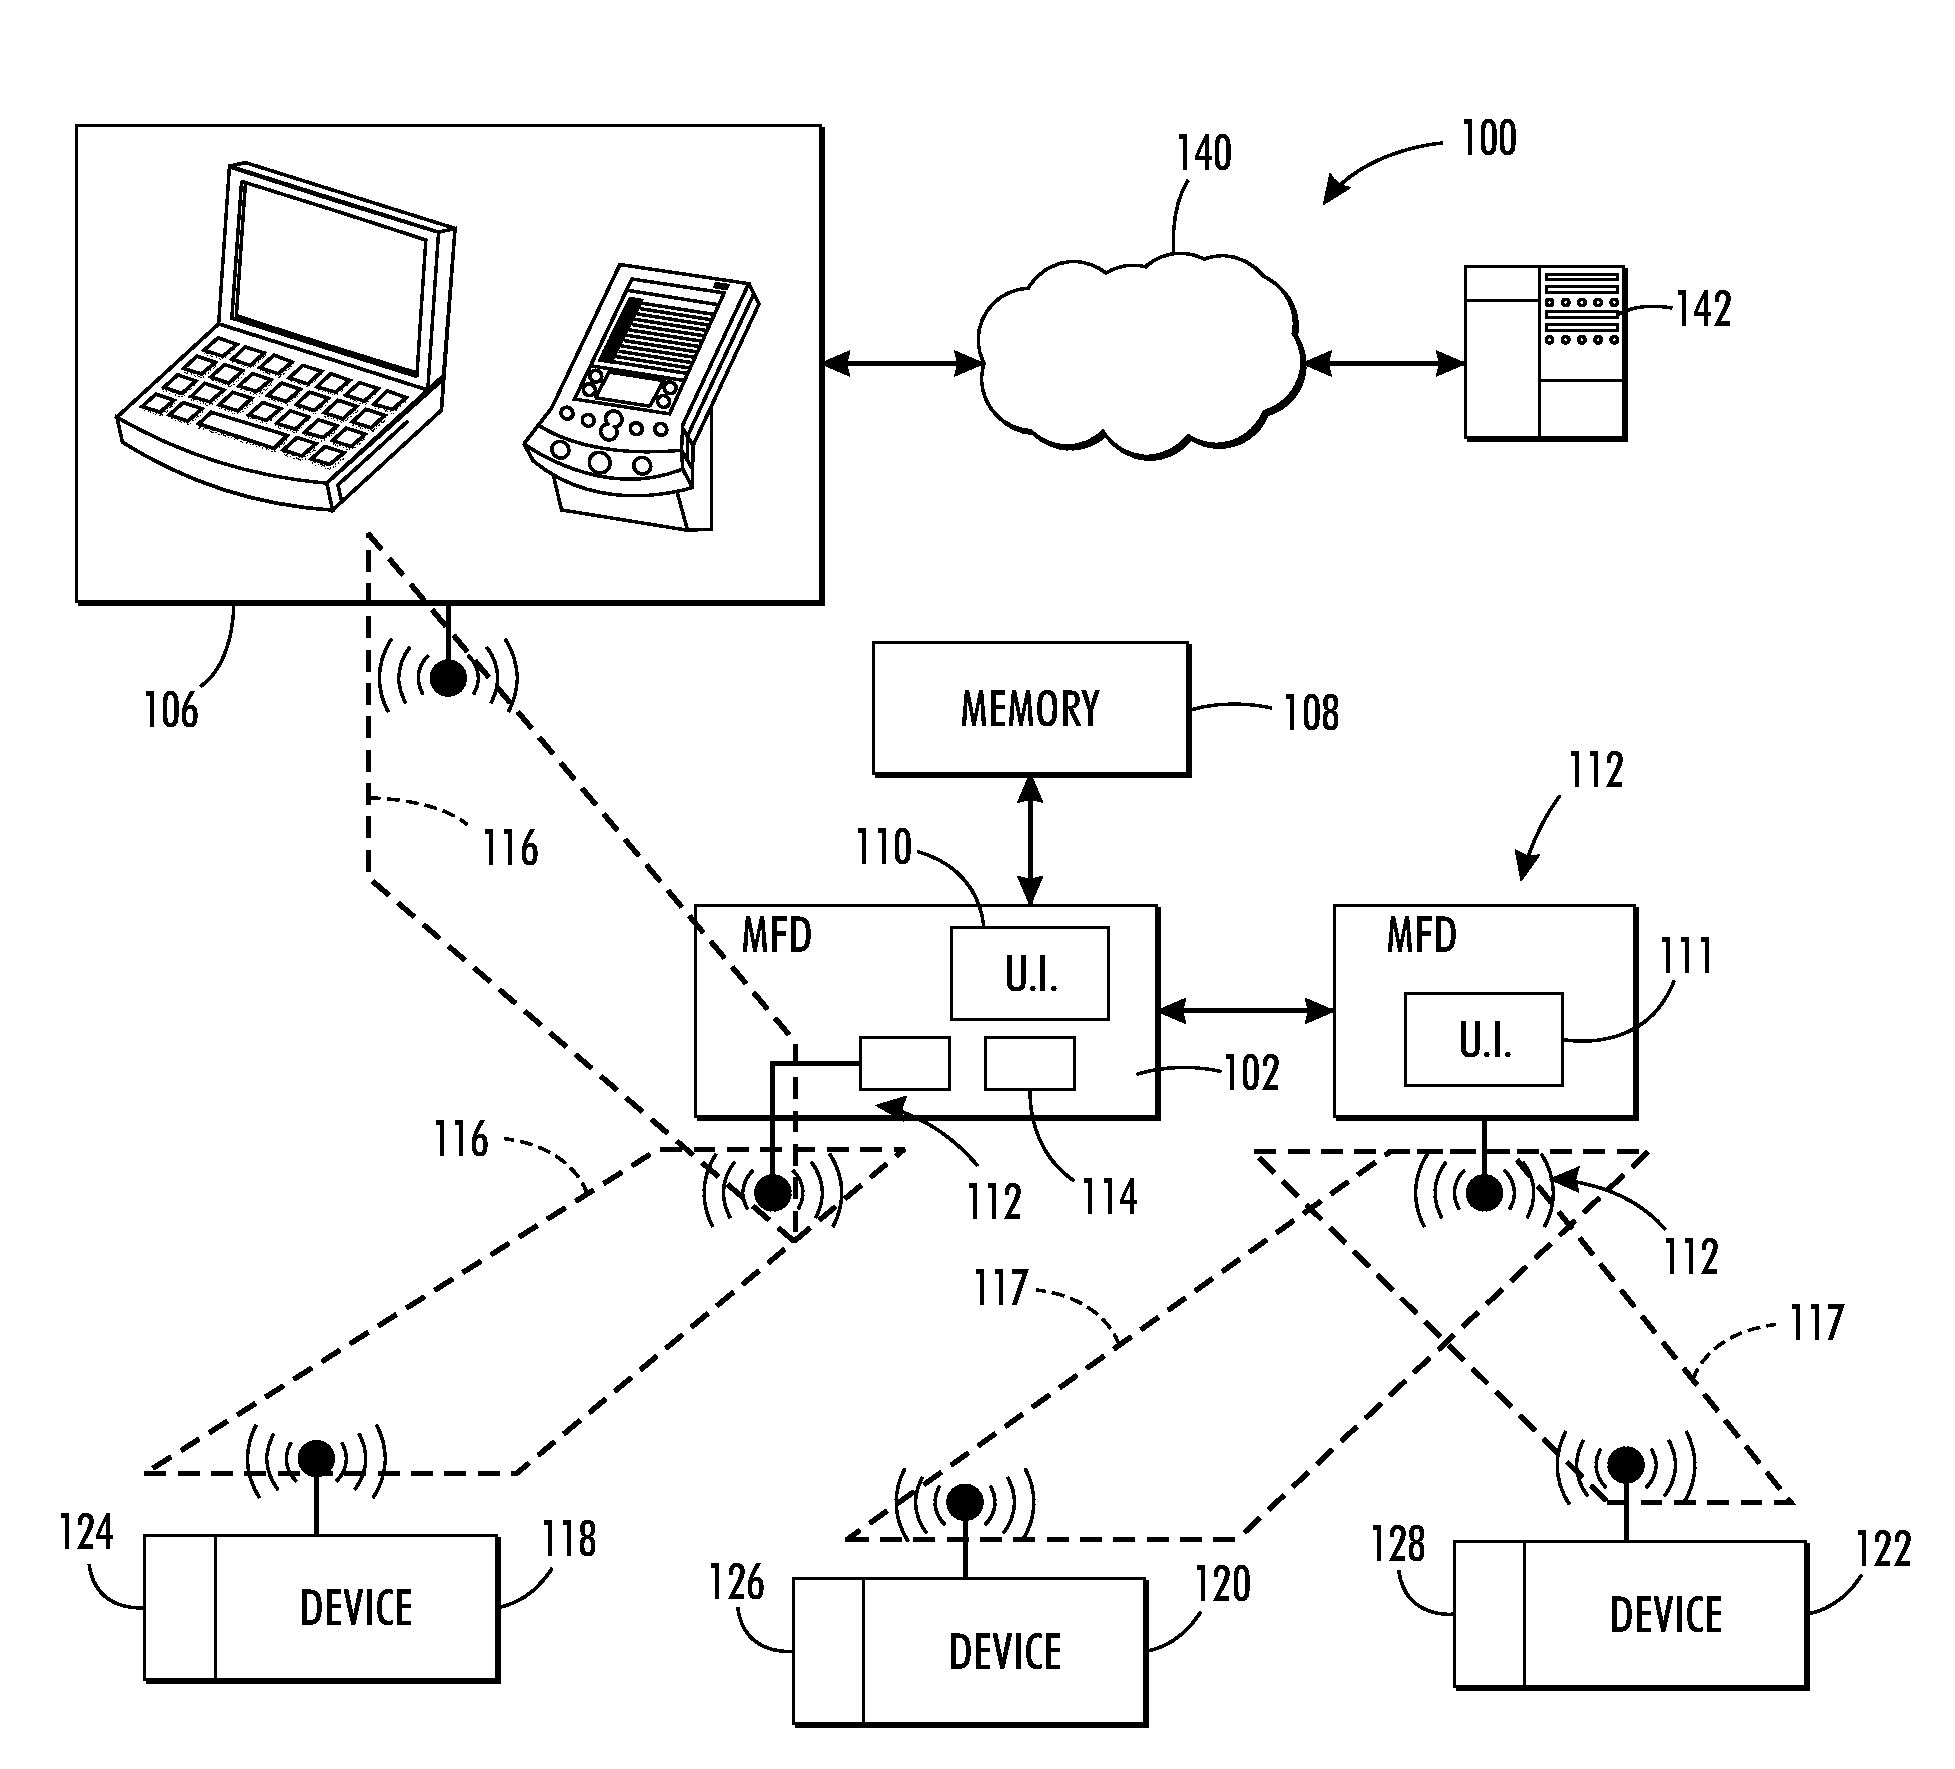 System and method for printing from portable devices